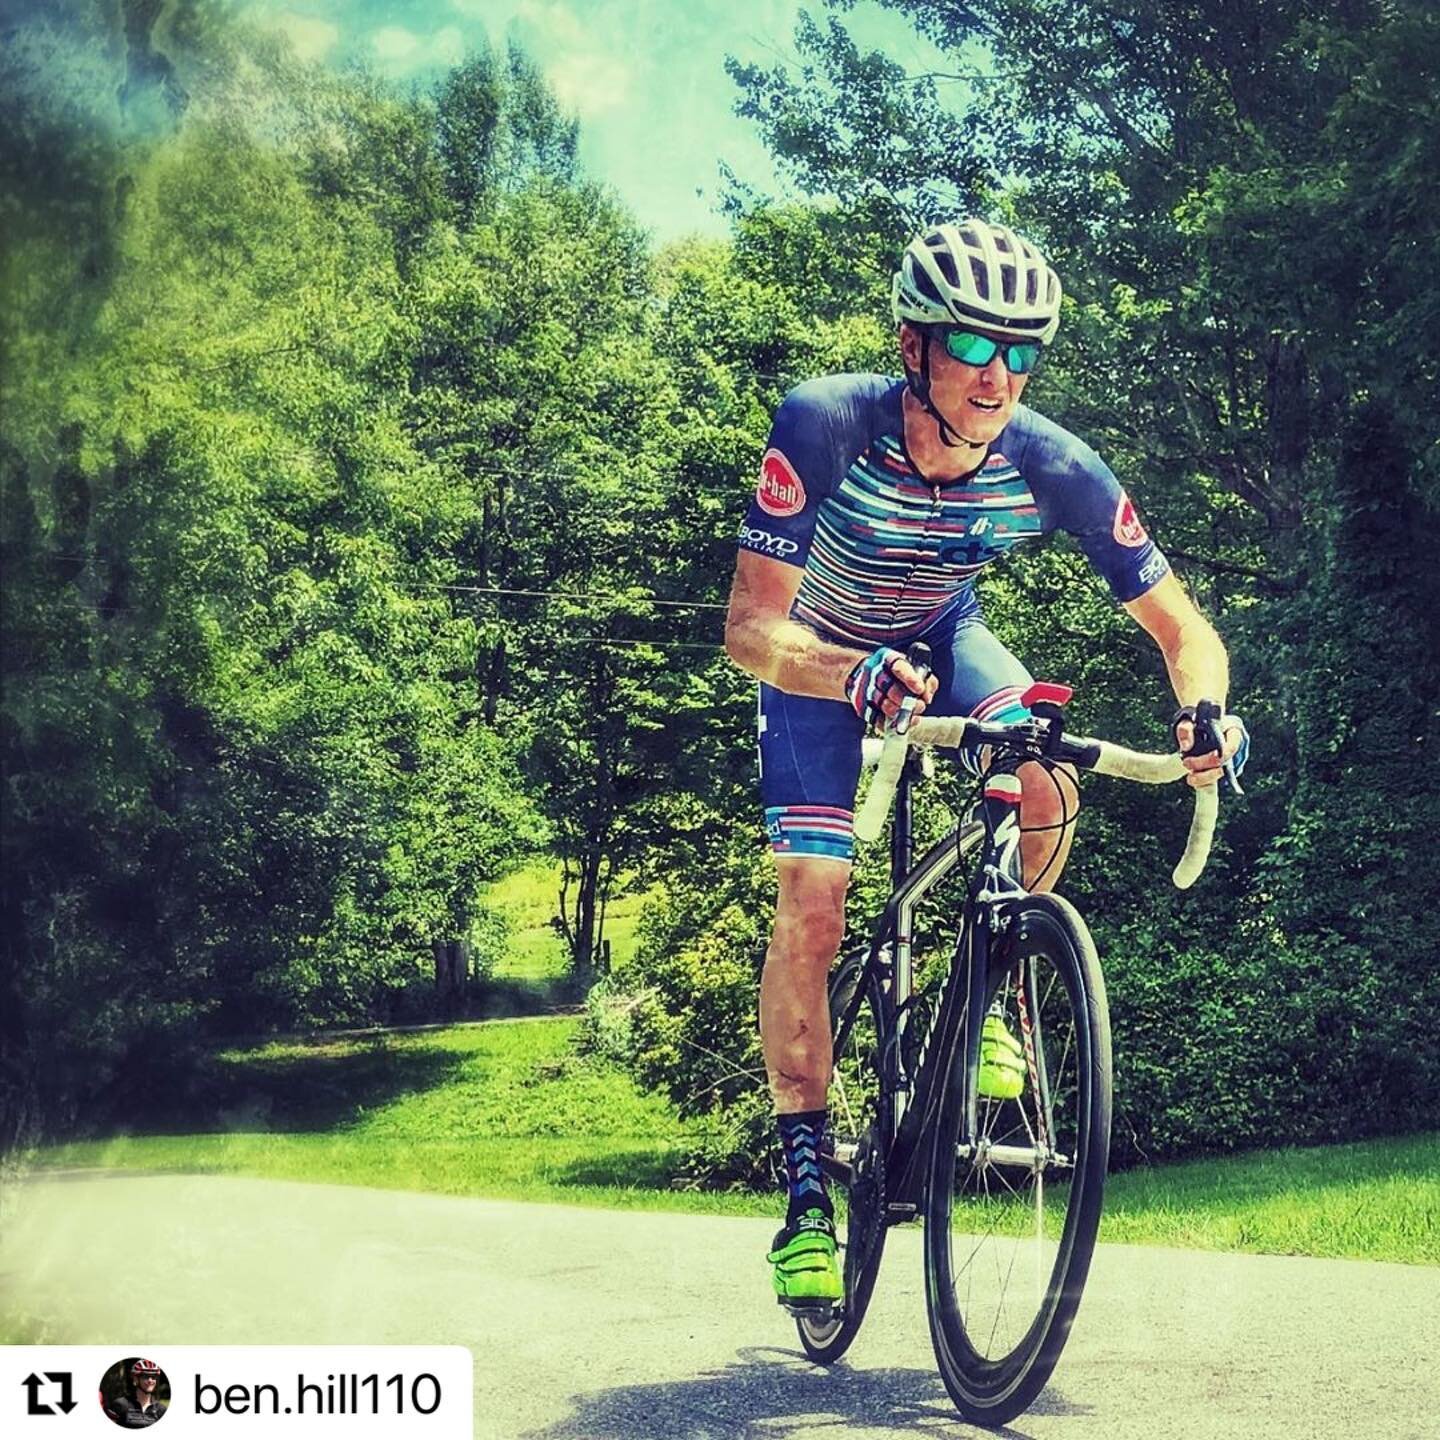 Repost from Ben Hill - congrats on winning the men&rsquo;s 40+ Lung Buster Time Trial series! 
・・・
&ldquo;For the last few seasons I have intentionally challenged myself to get on the road bike and compete, I am naturally an off-road racer (Mountain 